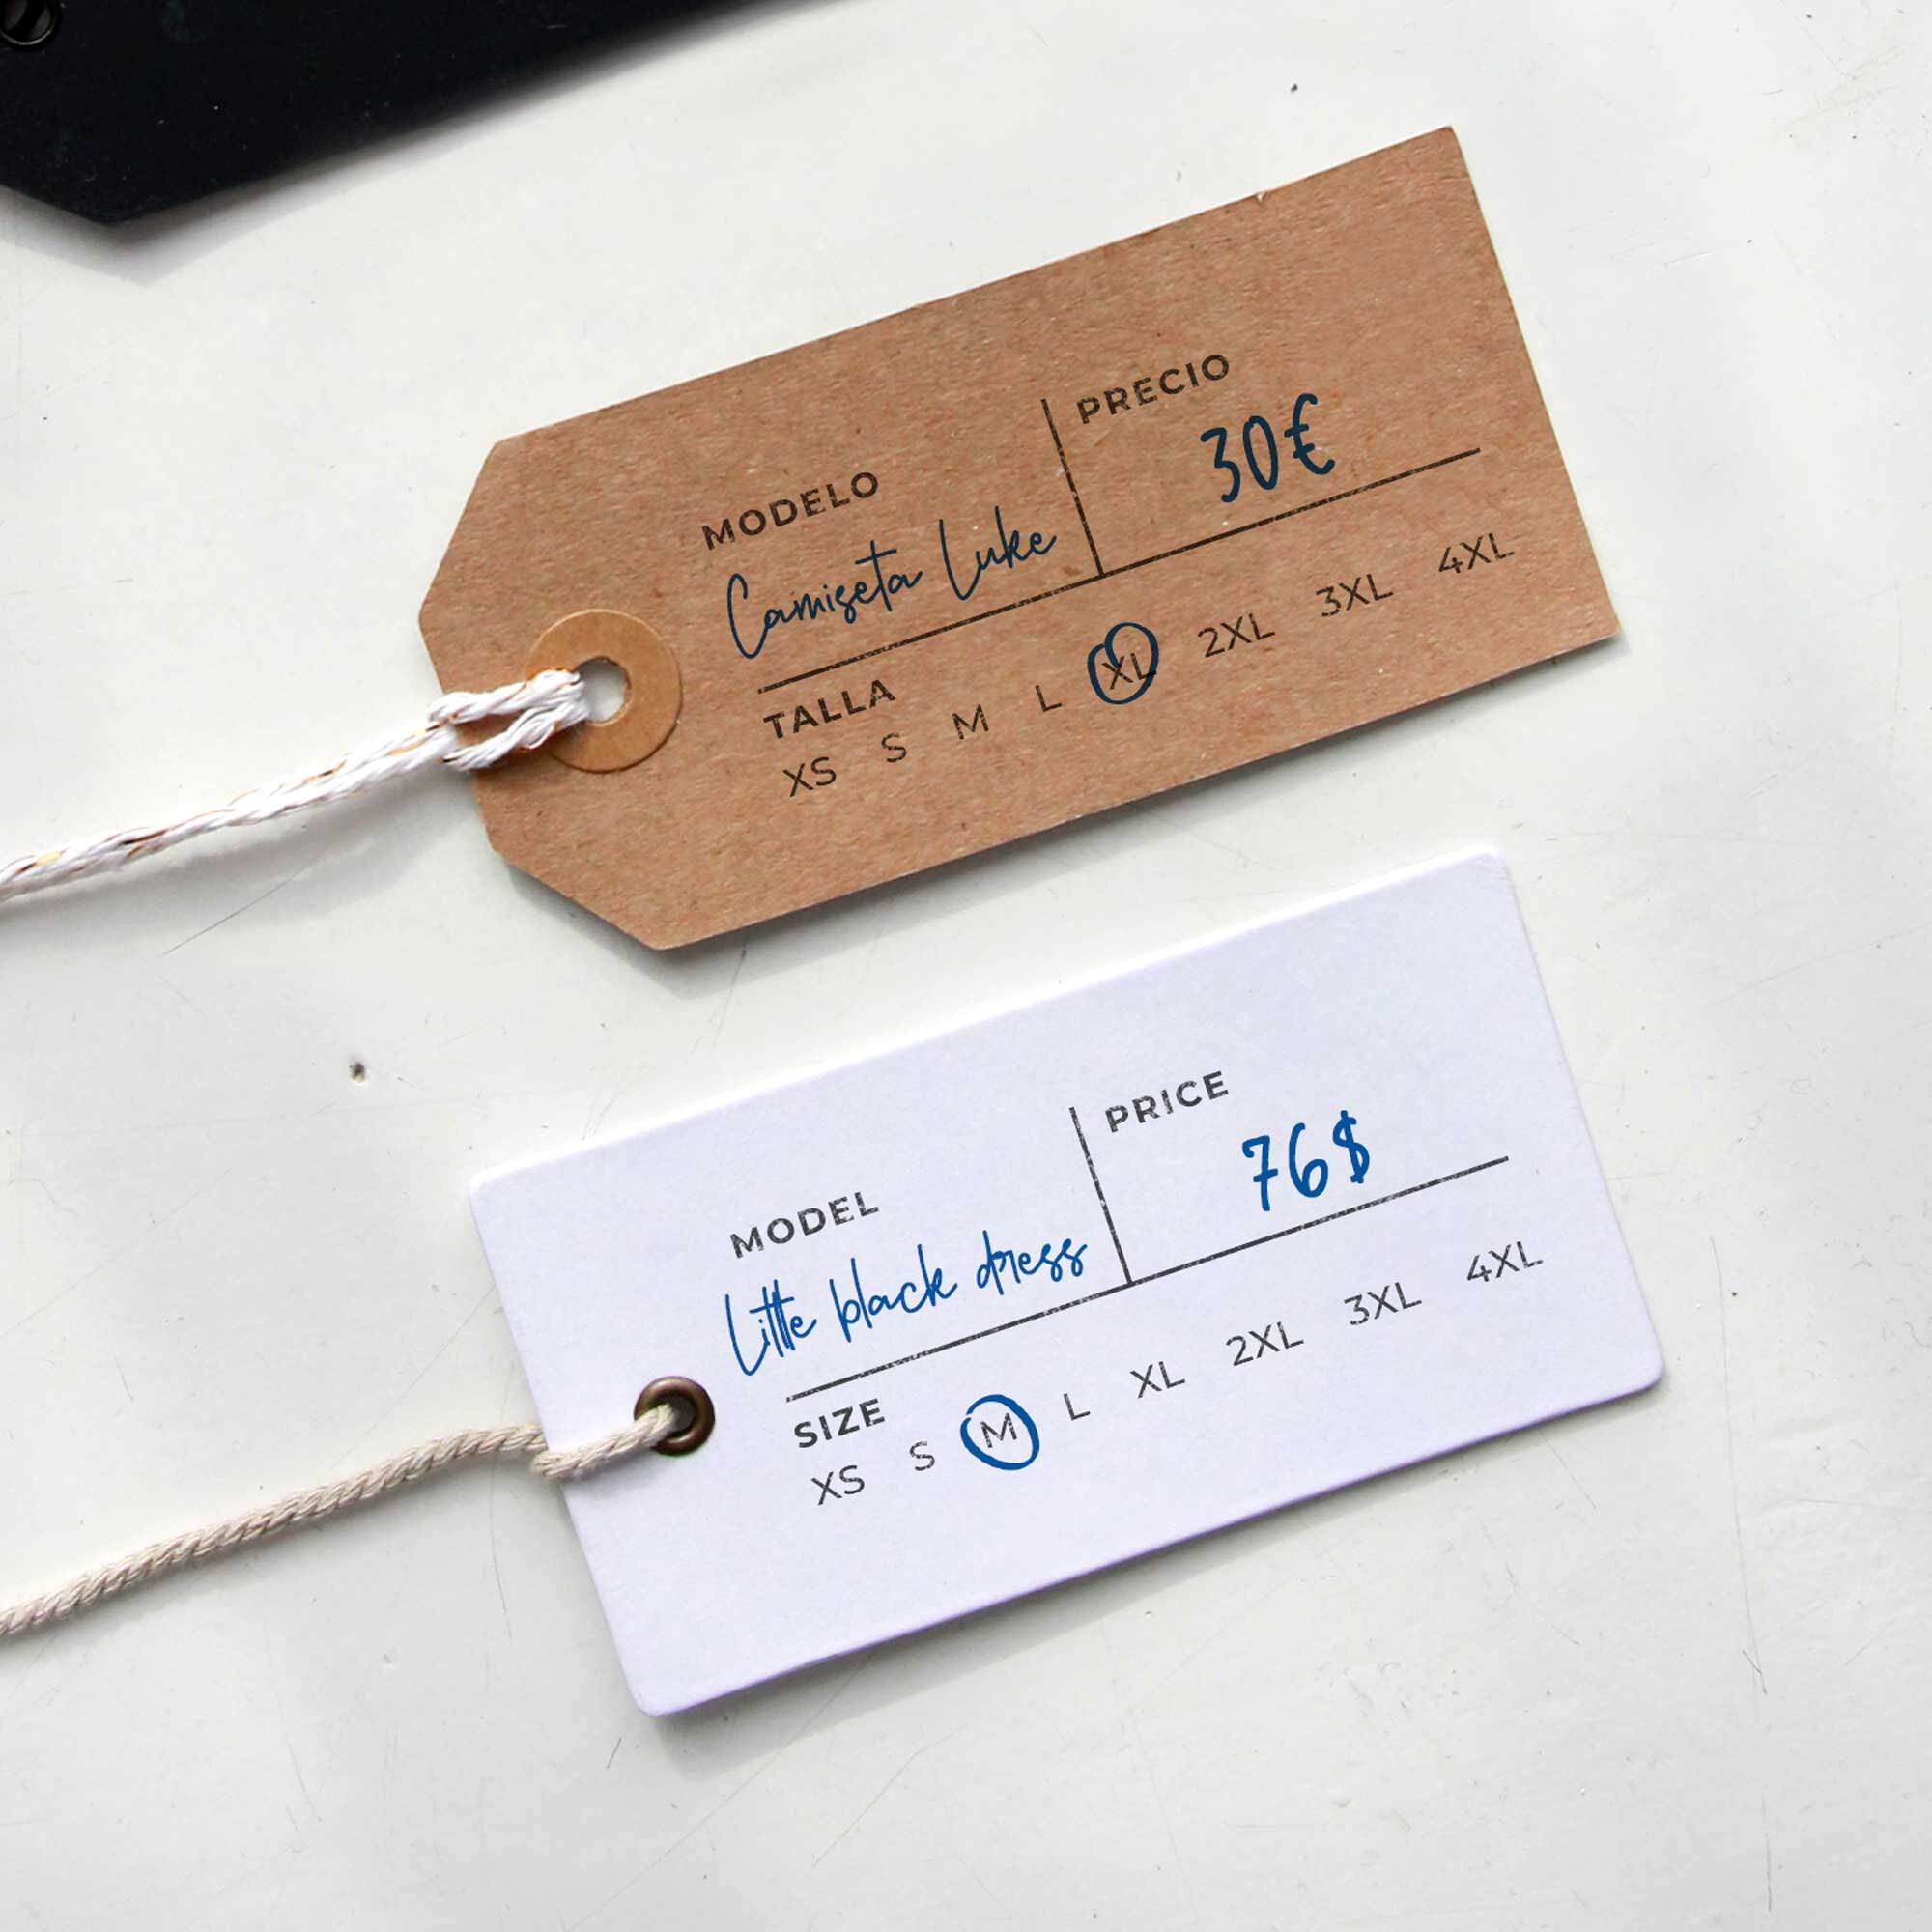 Stamp for Garment Tags With Fiber Content and Care 